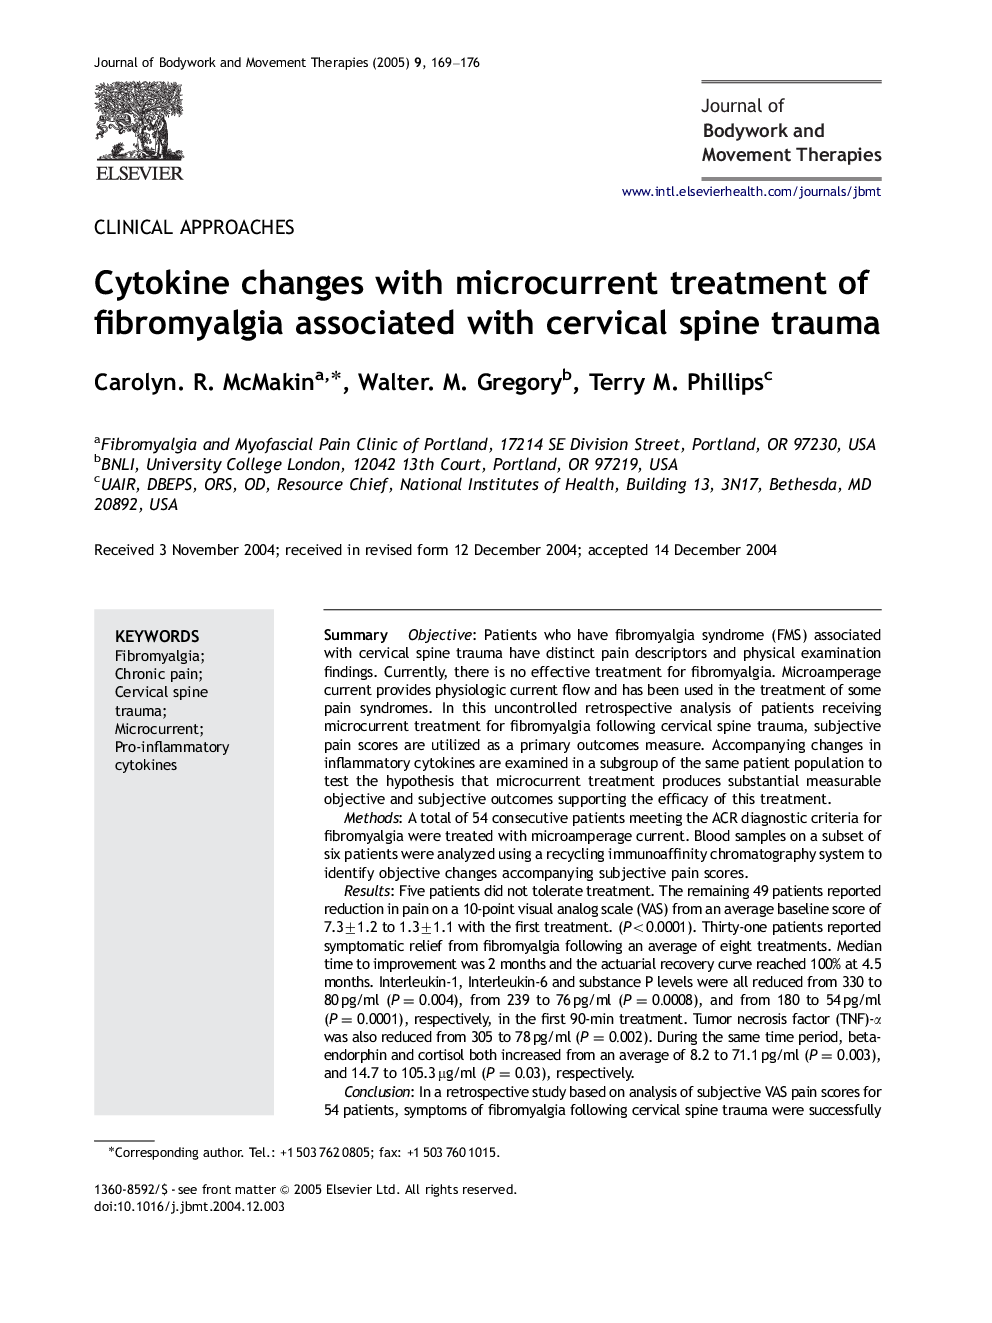 Cytokine changes with microcurrent treatment of fibromyalgia associated with cervical spine trauma